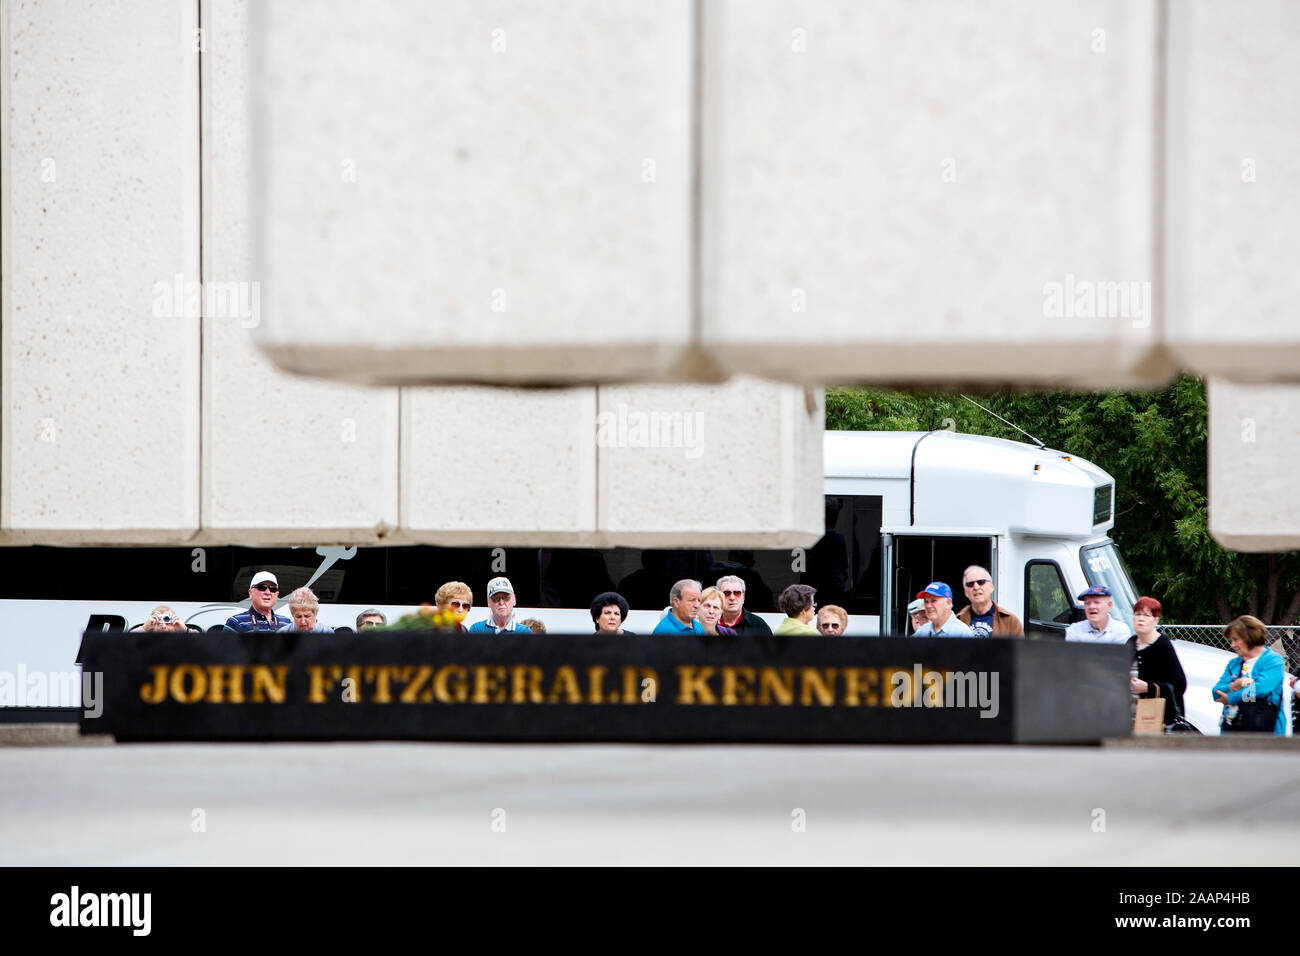 Tourists at the John Fitzgerald Kennedy Memorial, a monument in the West End District of Dallas. The monument was erectred in 1970 and was designed by architect Philip Johnson. The monument is about 180 meters from Dealey Plaza, where US President John F. Kennedy was assassinated. Stock Photo